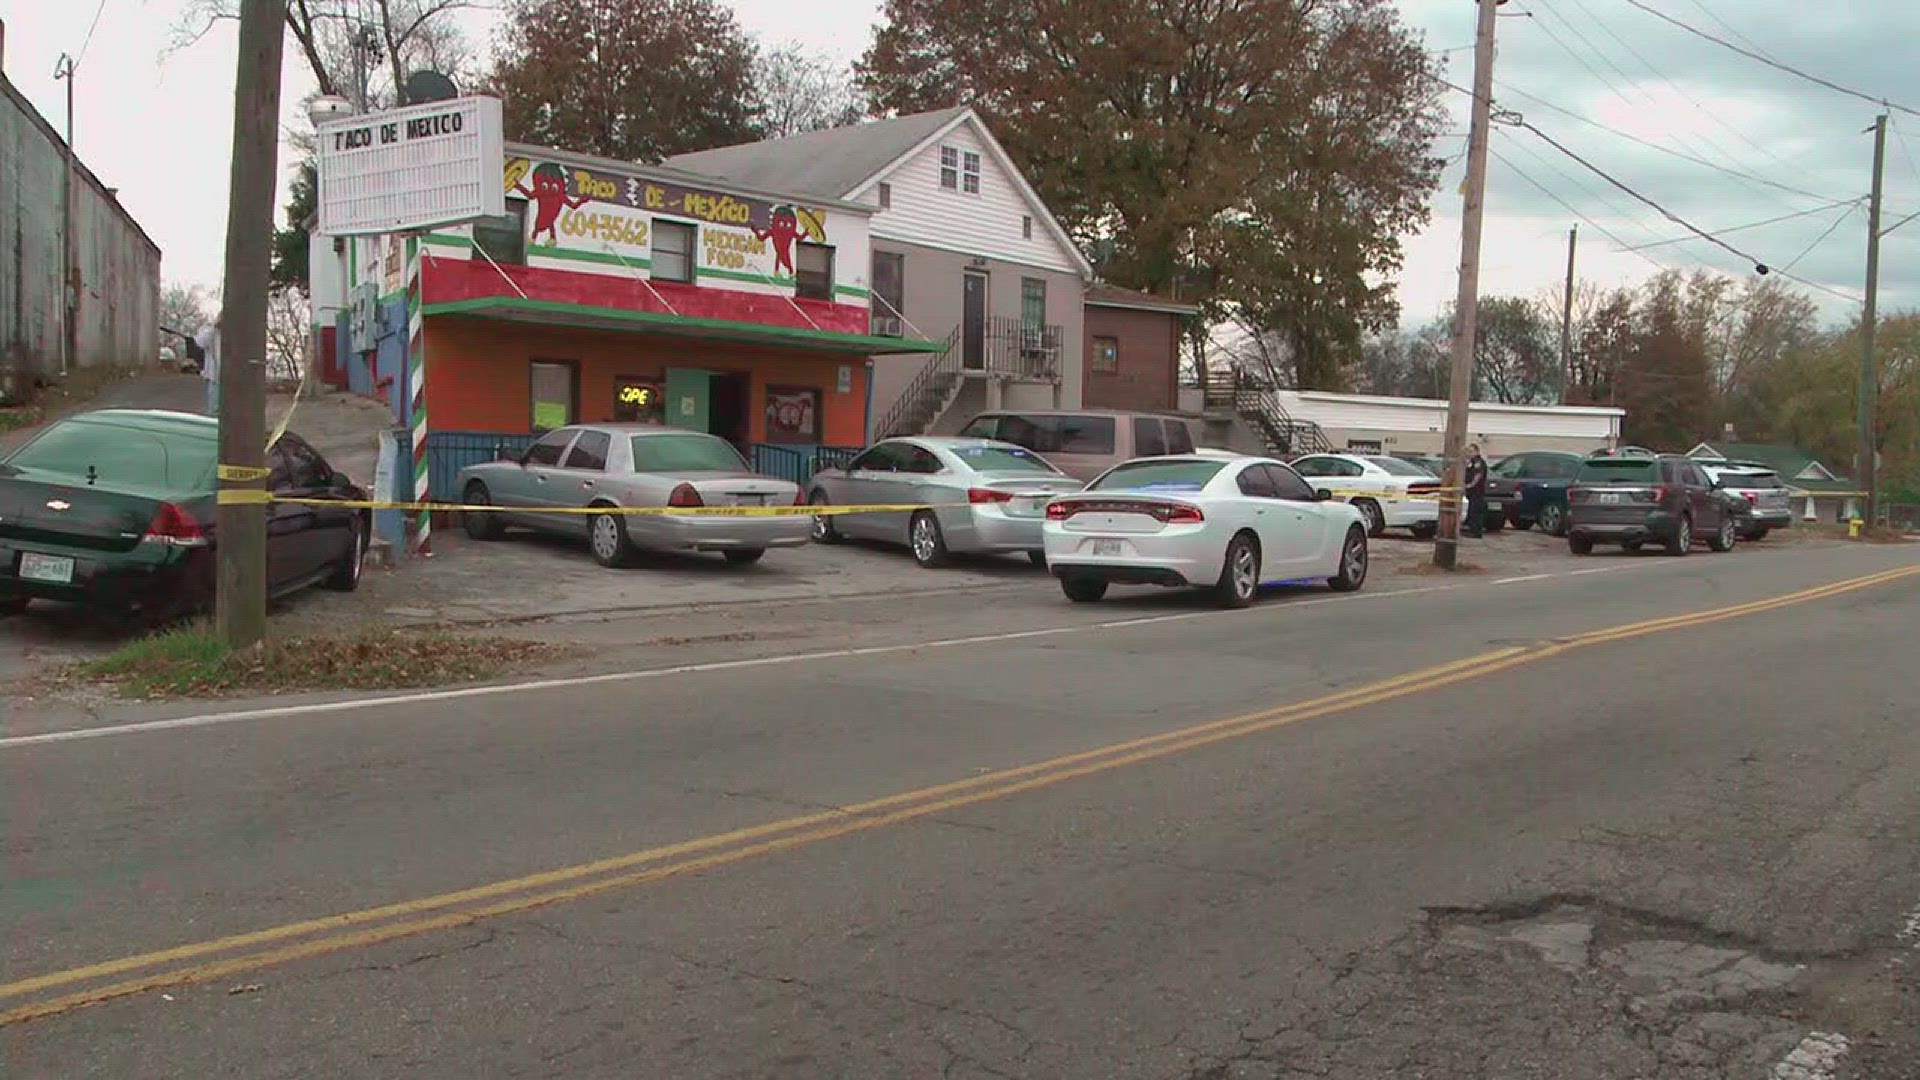 The Knox County Sheriff's Office conducted an operation at restaurant on Beaumont Avenue Wednesday afternoon.